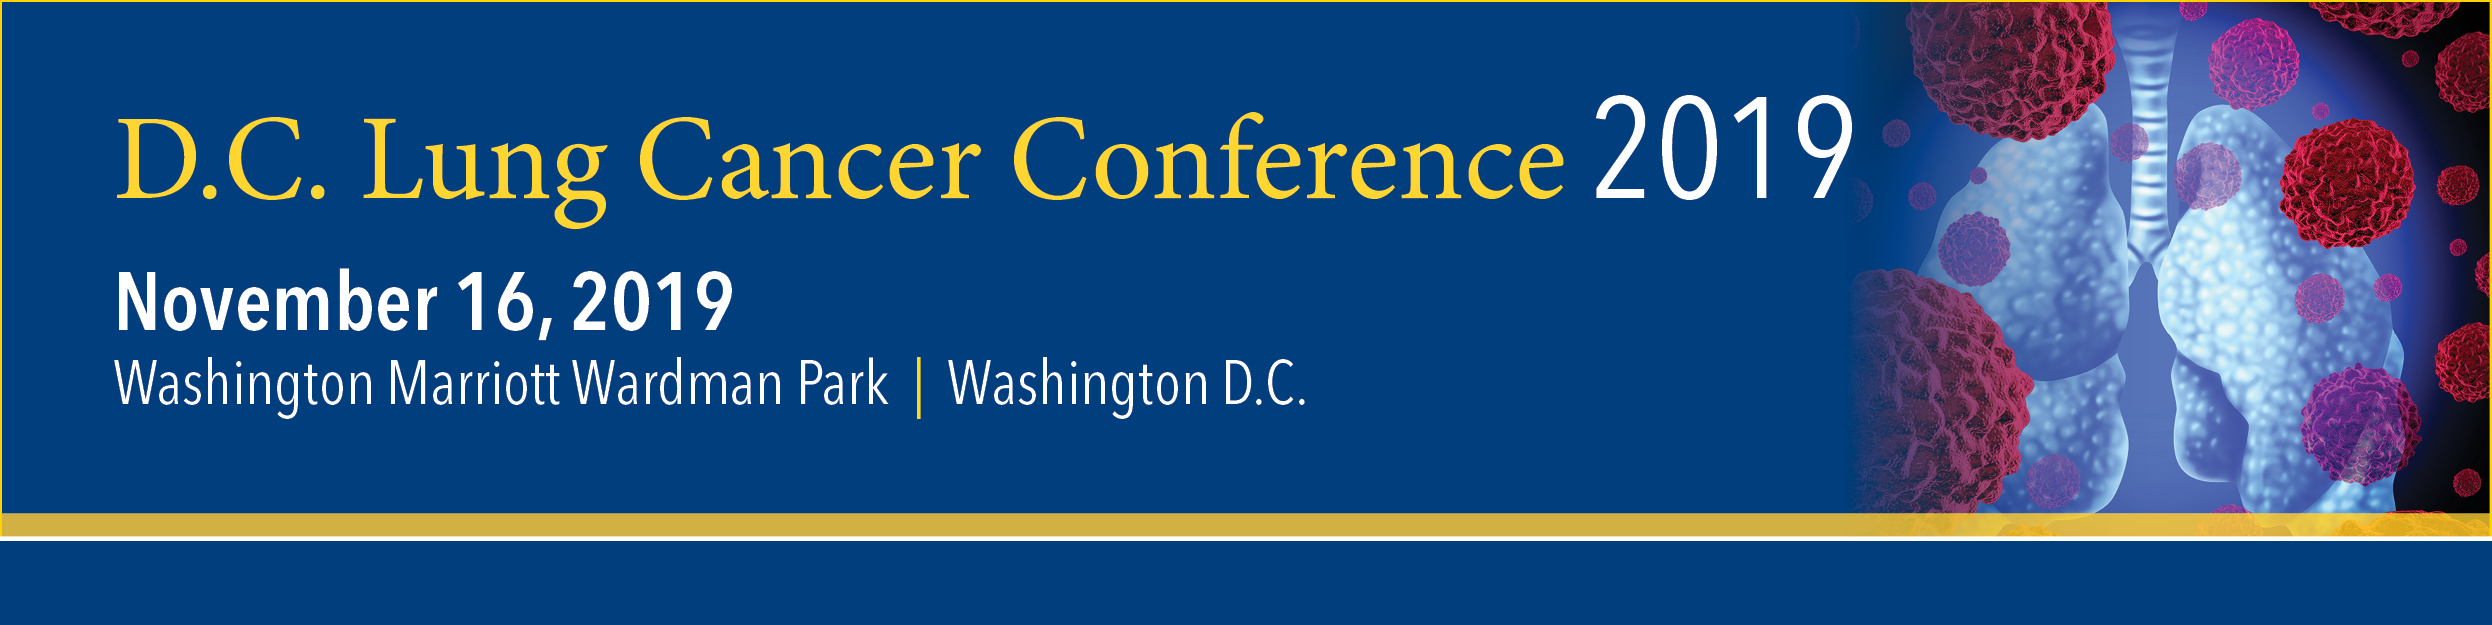 DC Lung Cancer Conference 2019 Banner